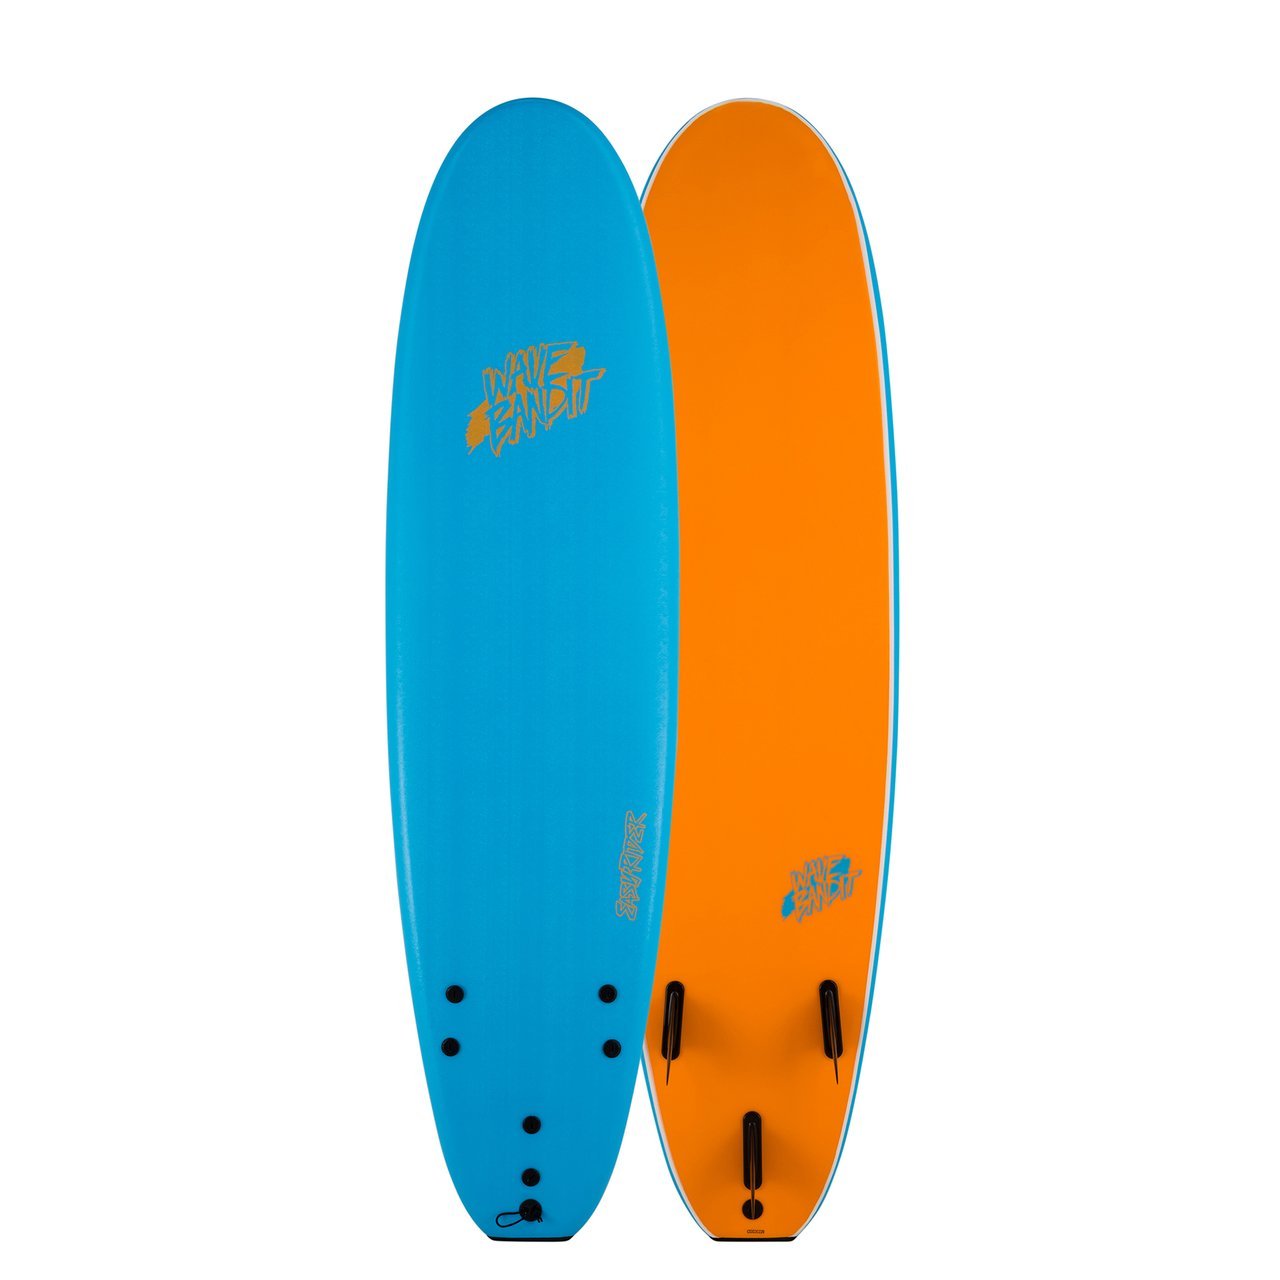 Fliteboard: The Easy Wave Rider - CALIBRE